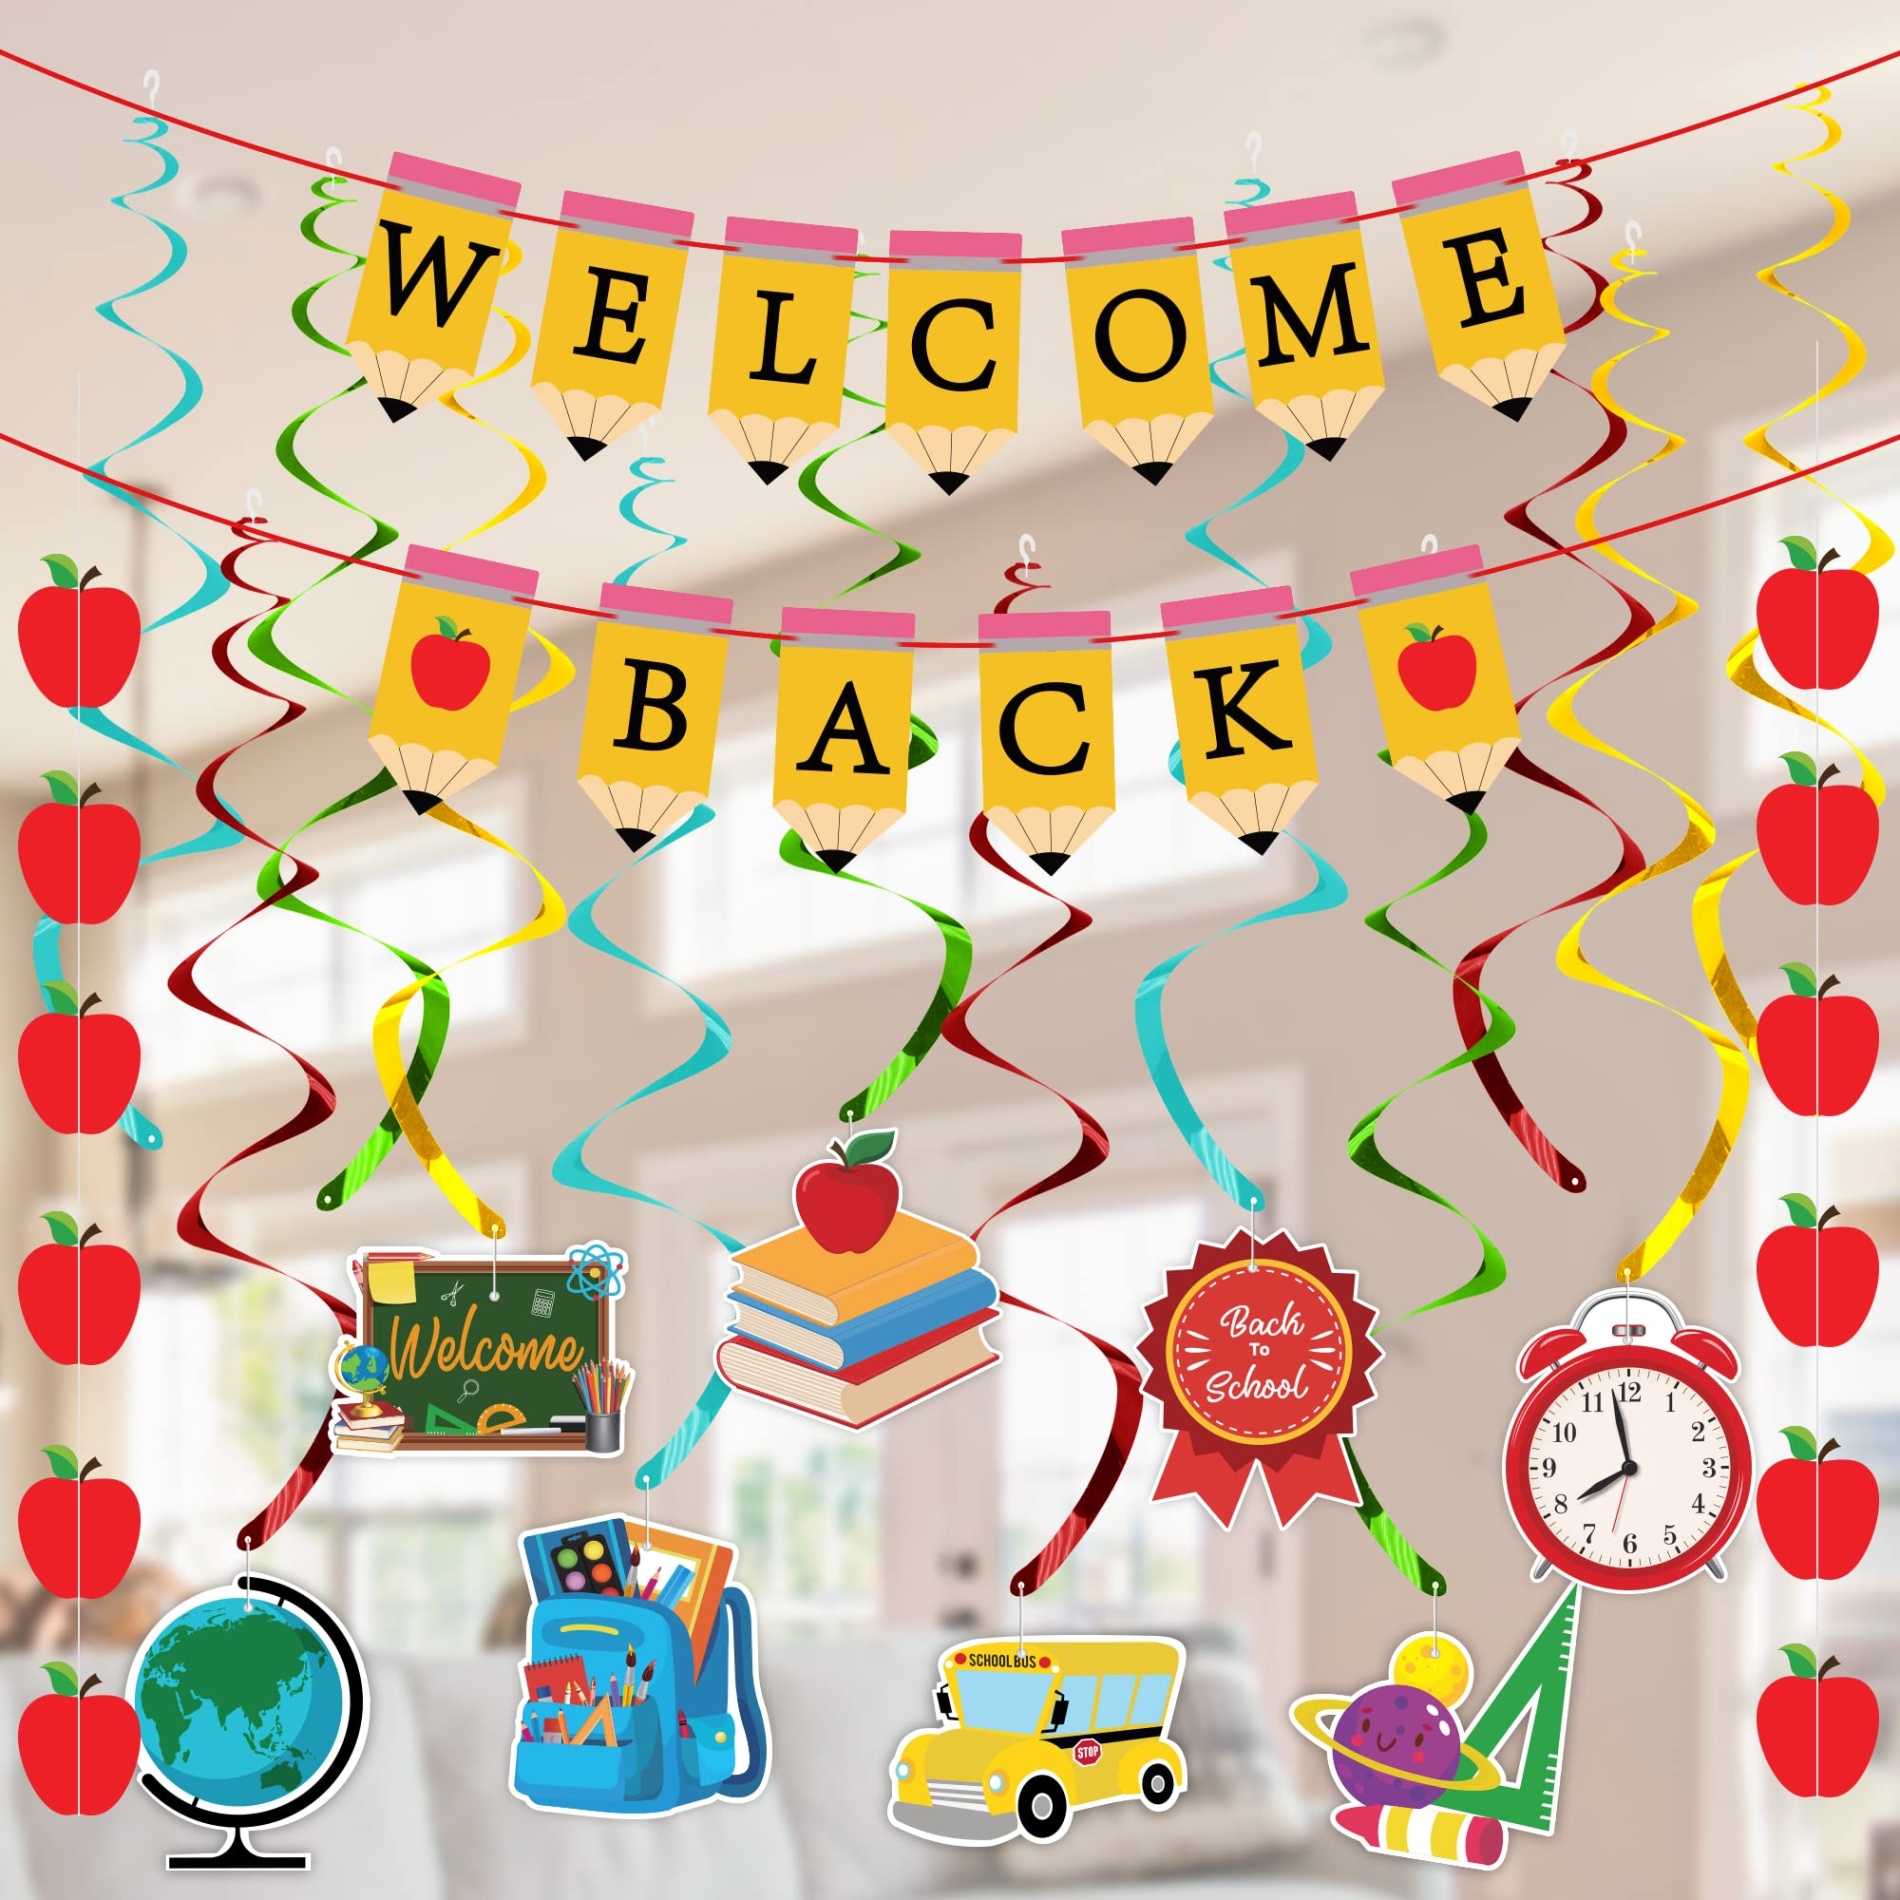 back to school decor Bulan 3 Back to School Party Decorations Supplies - NO DIY- Welcome Back Pencil  Banners Apple Garland Banners- Back to School Hanging Swirls for First Day  of